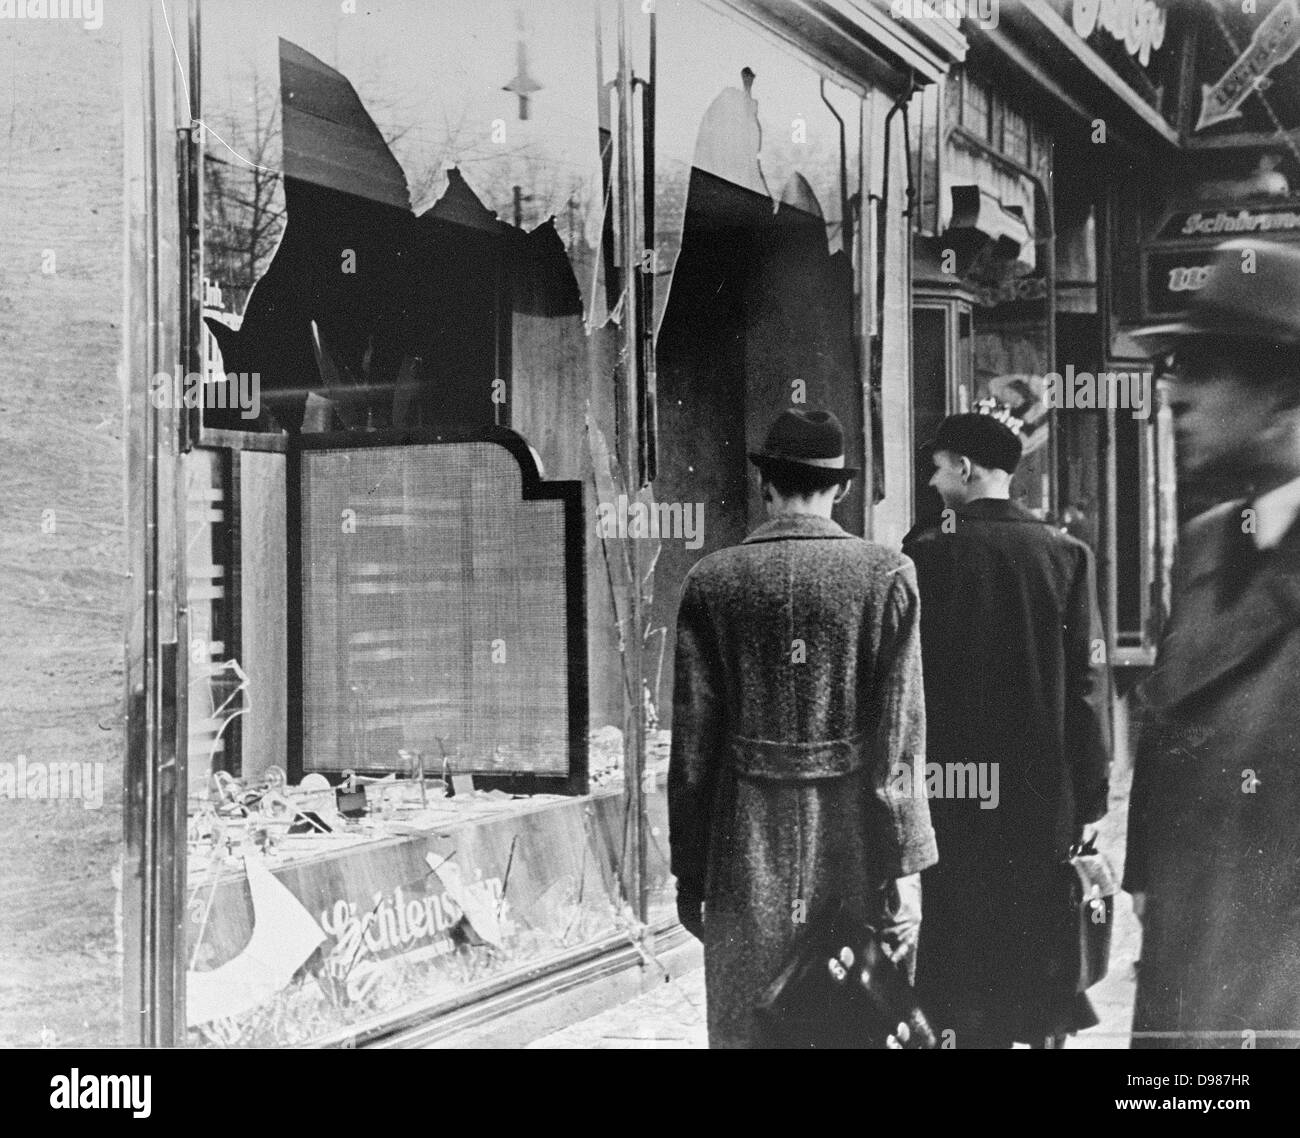 Germans pass by the smashed windows of a Jewish-owned shop. The aftermath of Kristallnacht (Night of Broken Glass) 9-10 November 1938, the German anti-semitic pogrom , when over 200 Synagogues were destroyed and thousands of Jewish homes and businesses were ransacked. Stock Photo